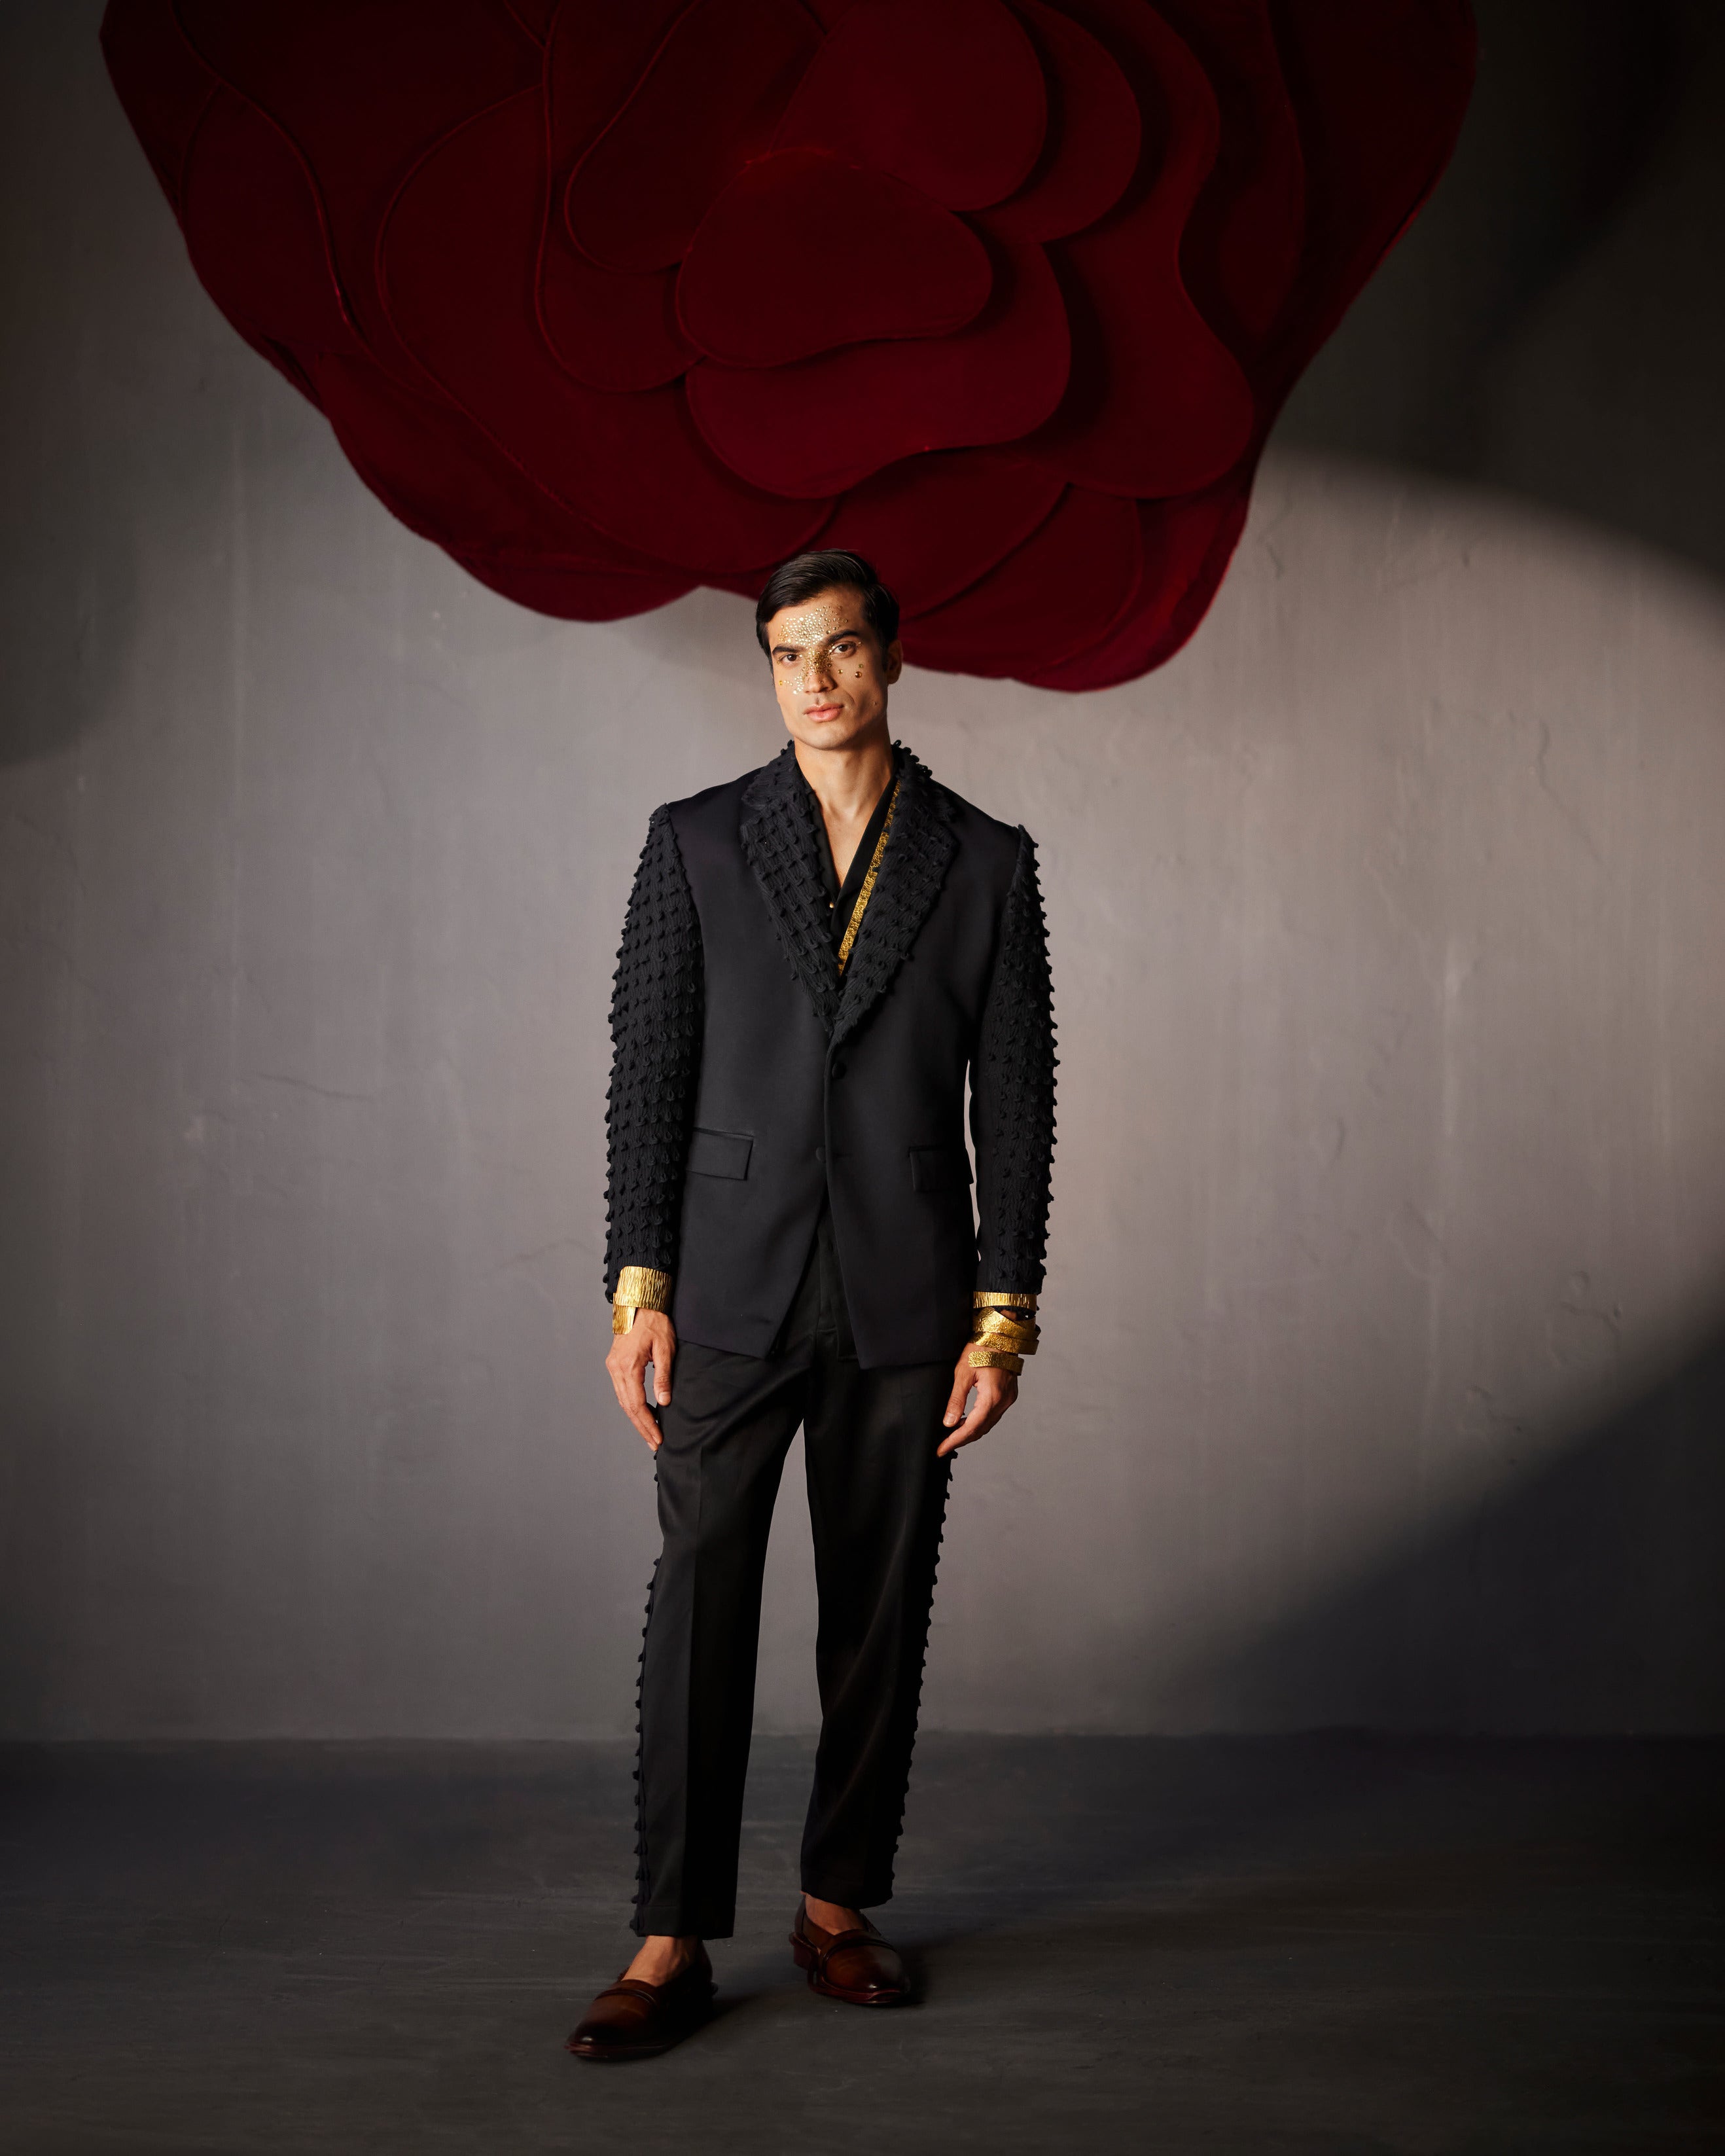 Sleek Stygian Blazer with a slim-fit design, crafted from rich, dark fabric for a polished and contemporary appearance